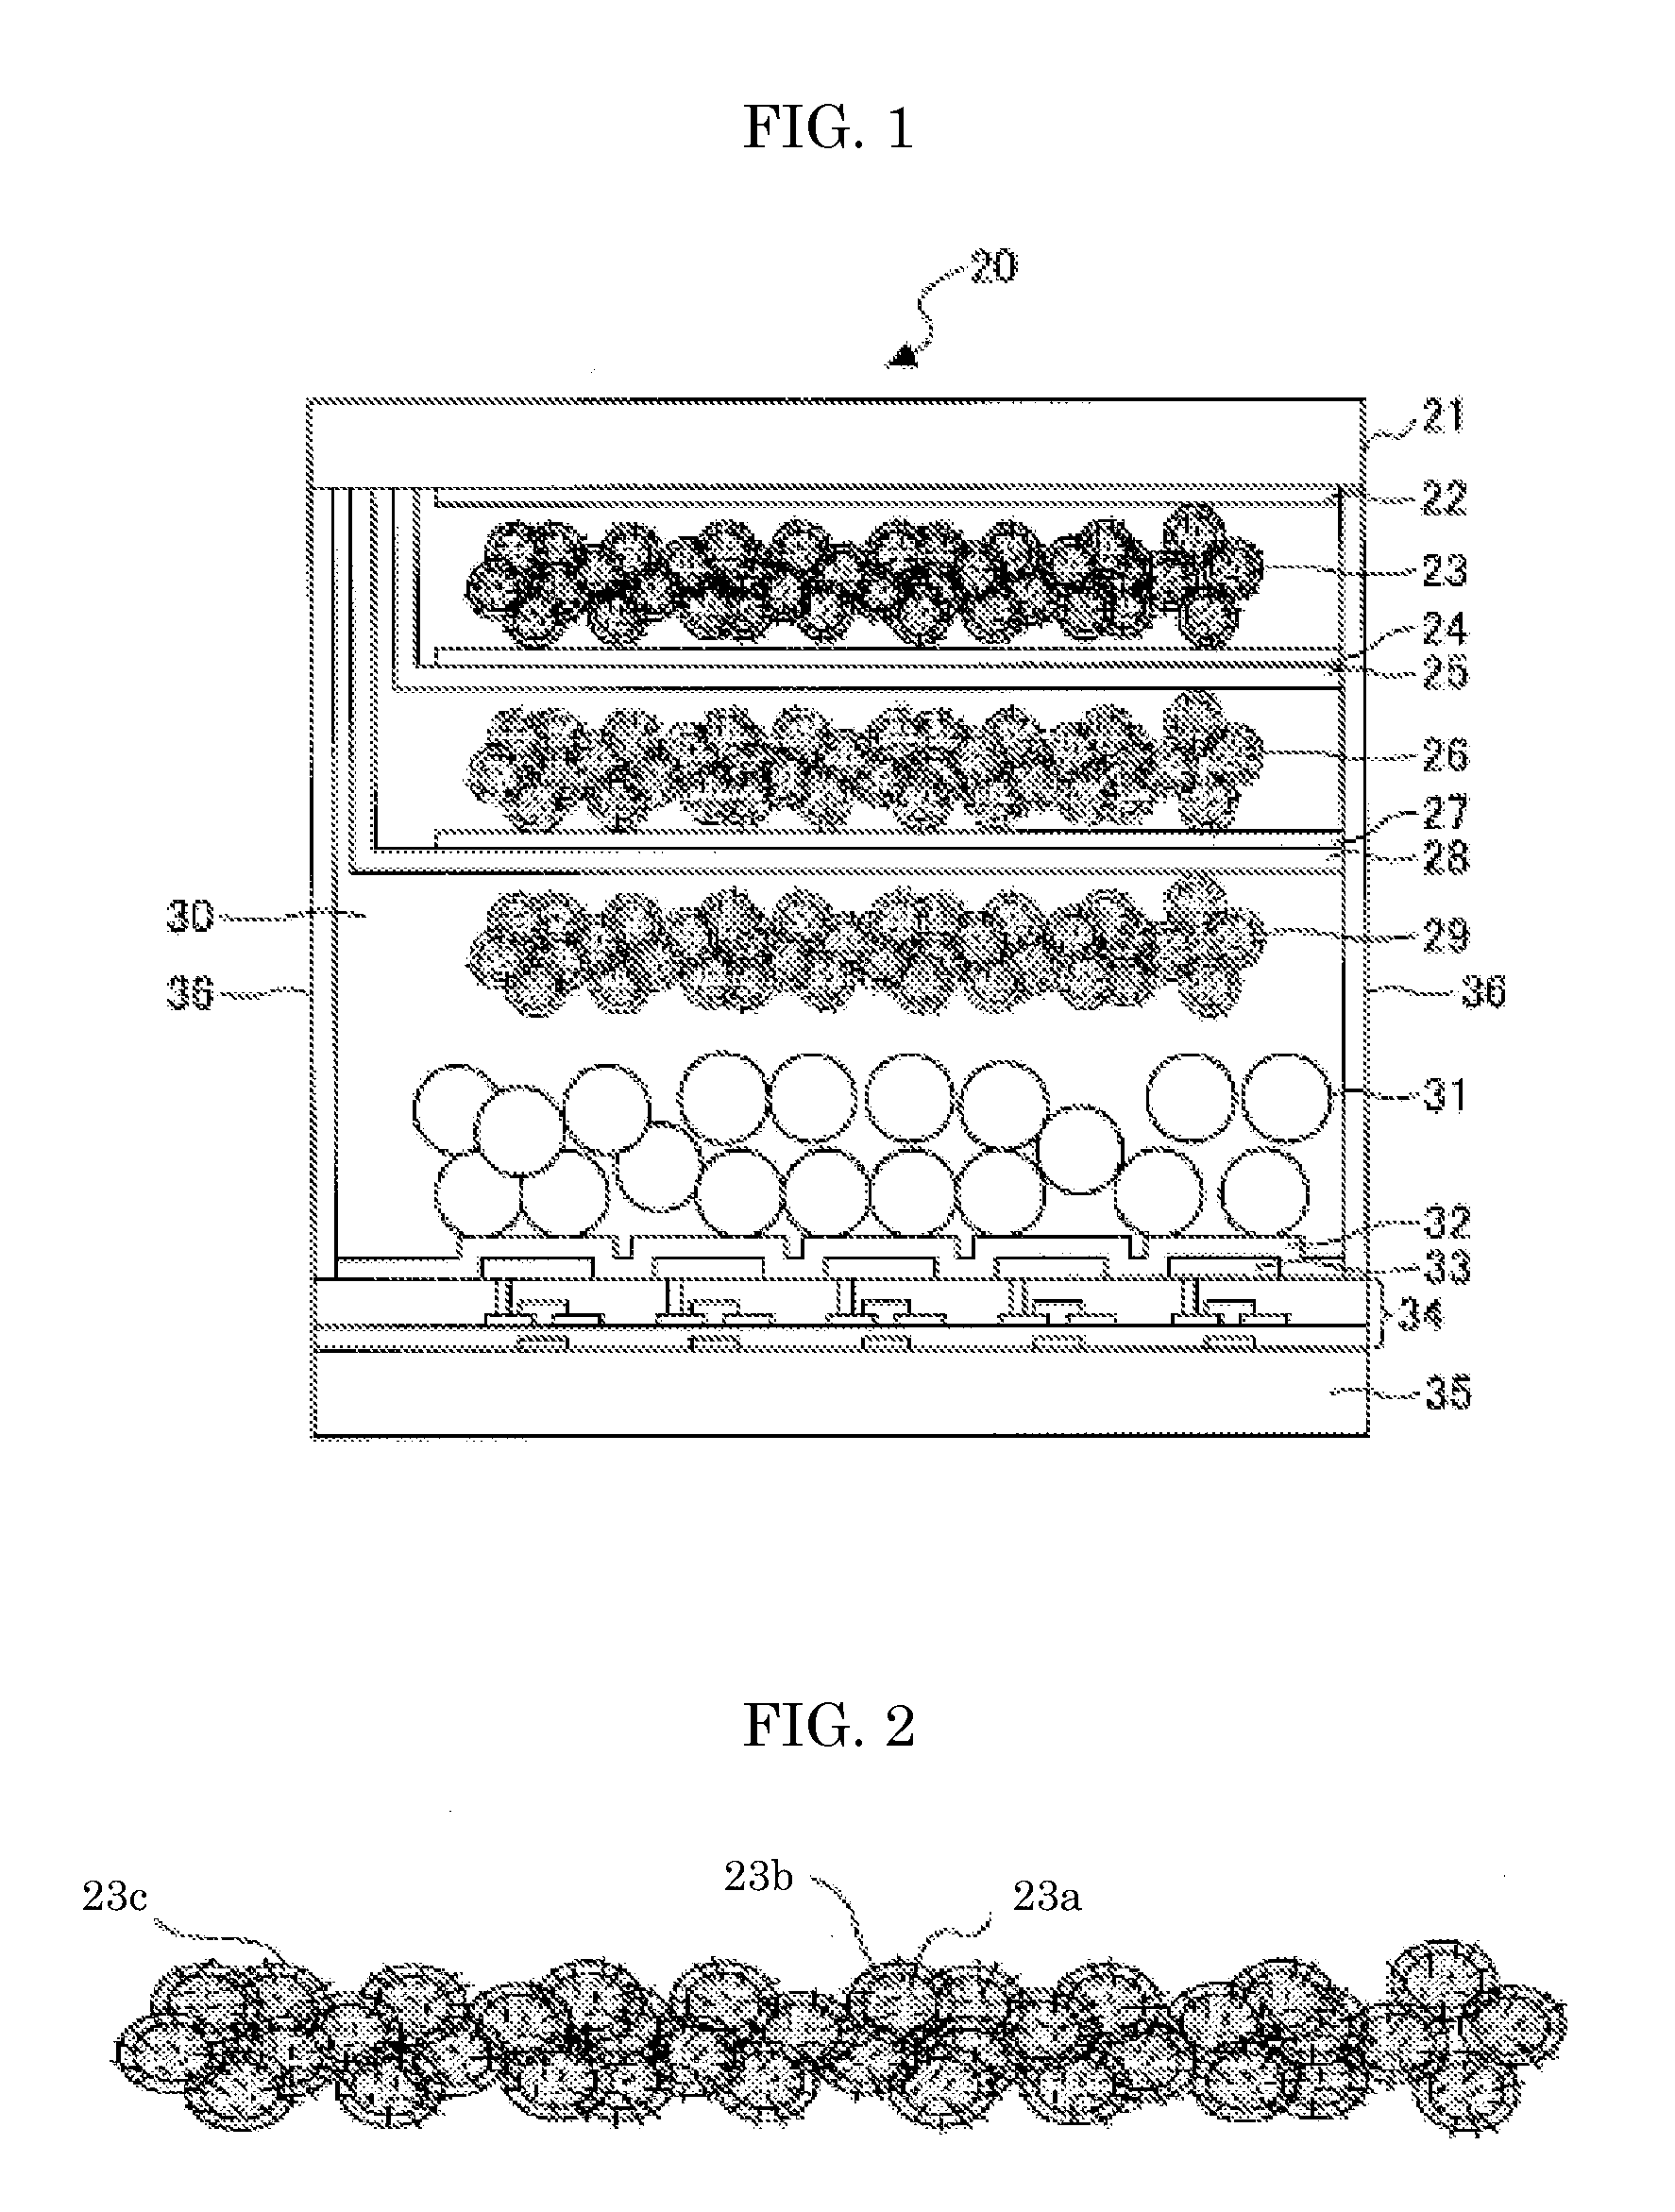 Electrochromic display element, display device, information system, and electrochromic dimming lens